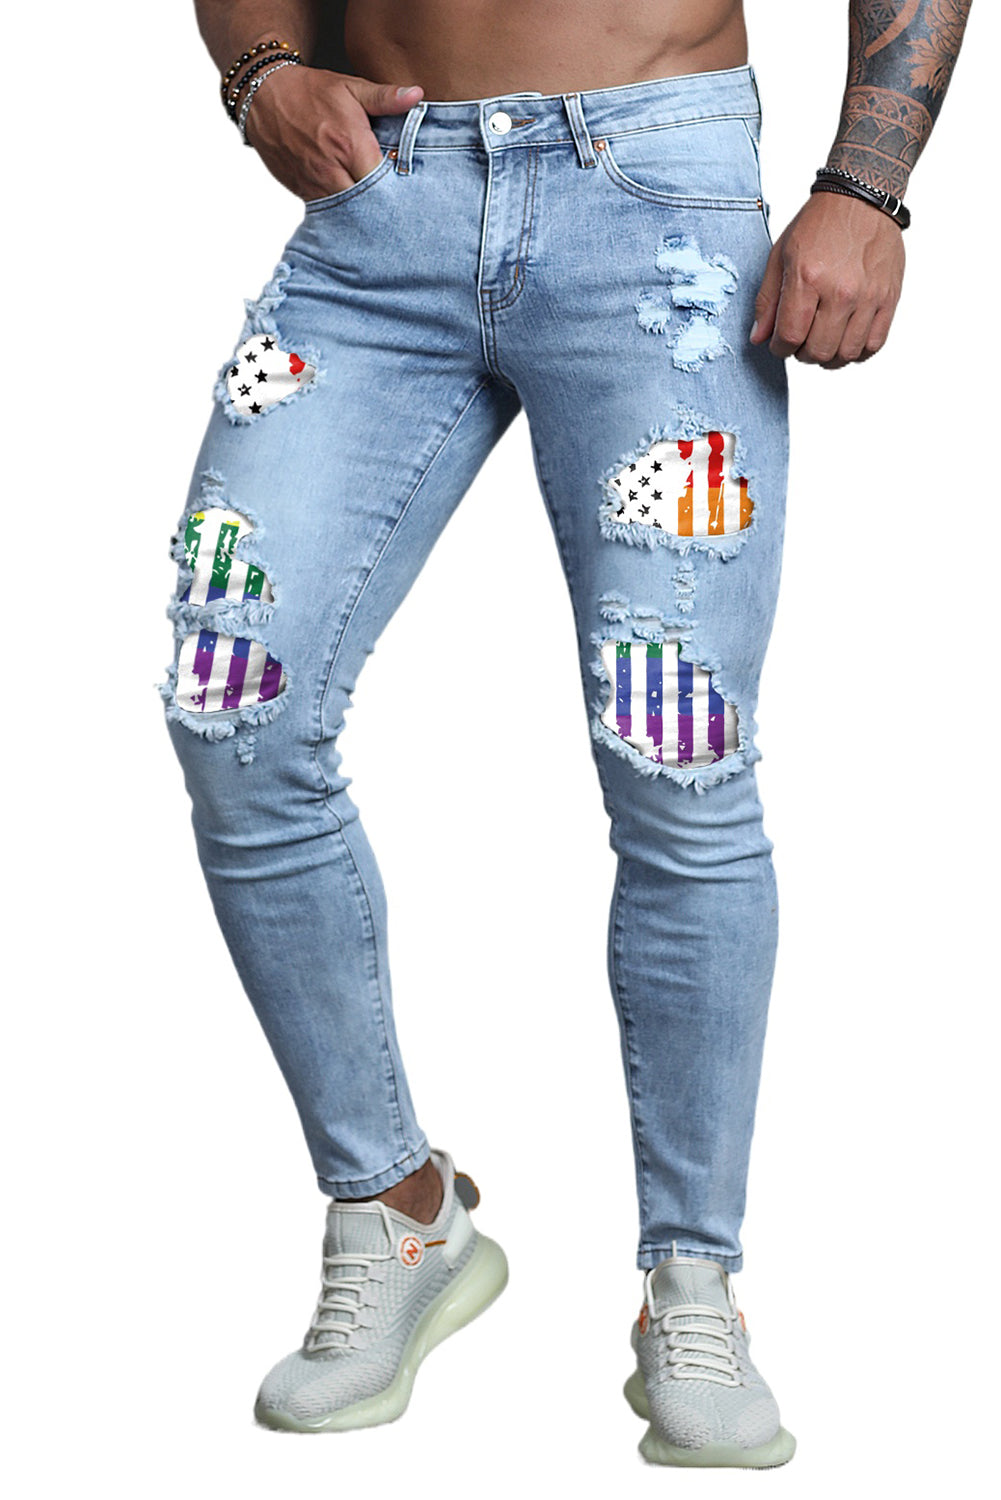 MC783128-4-S, MC783128-4-M, MC783128-4-L, MC783128-4-XL, MC783128-4-2XL, Sky Blue Skinny Jeans for Men Pride Gay Stripes and Stars Print Ripped Denim Pants